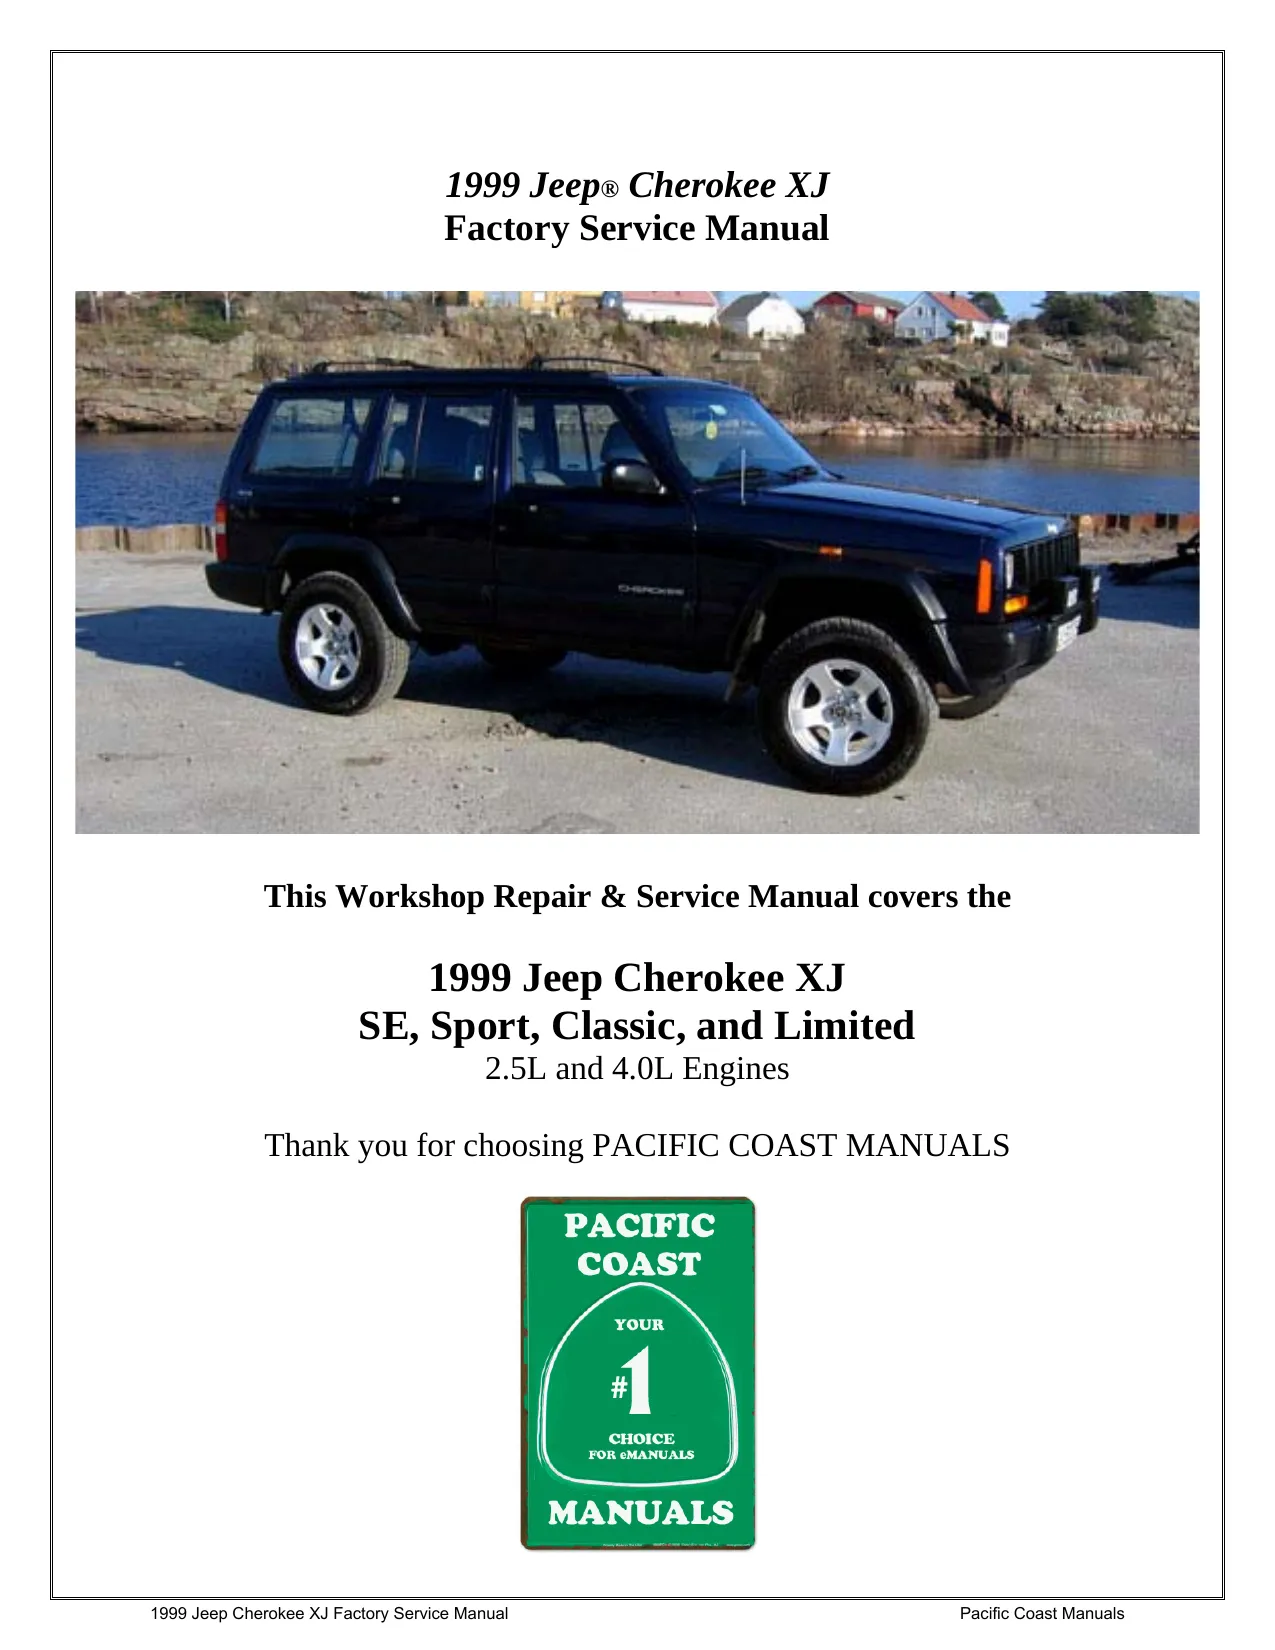 1999 Jeep Cherokee XJ, SE, Sport, Classic, and Limited Series, 2.5L, 4.0L factory service manual Preview image 1